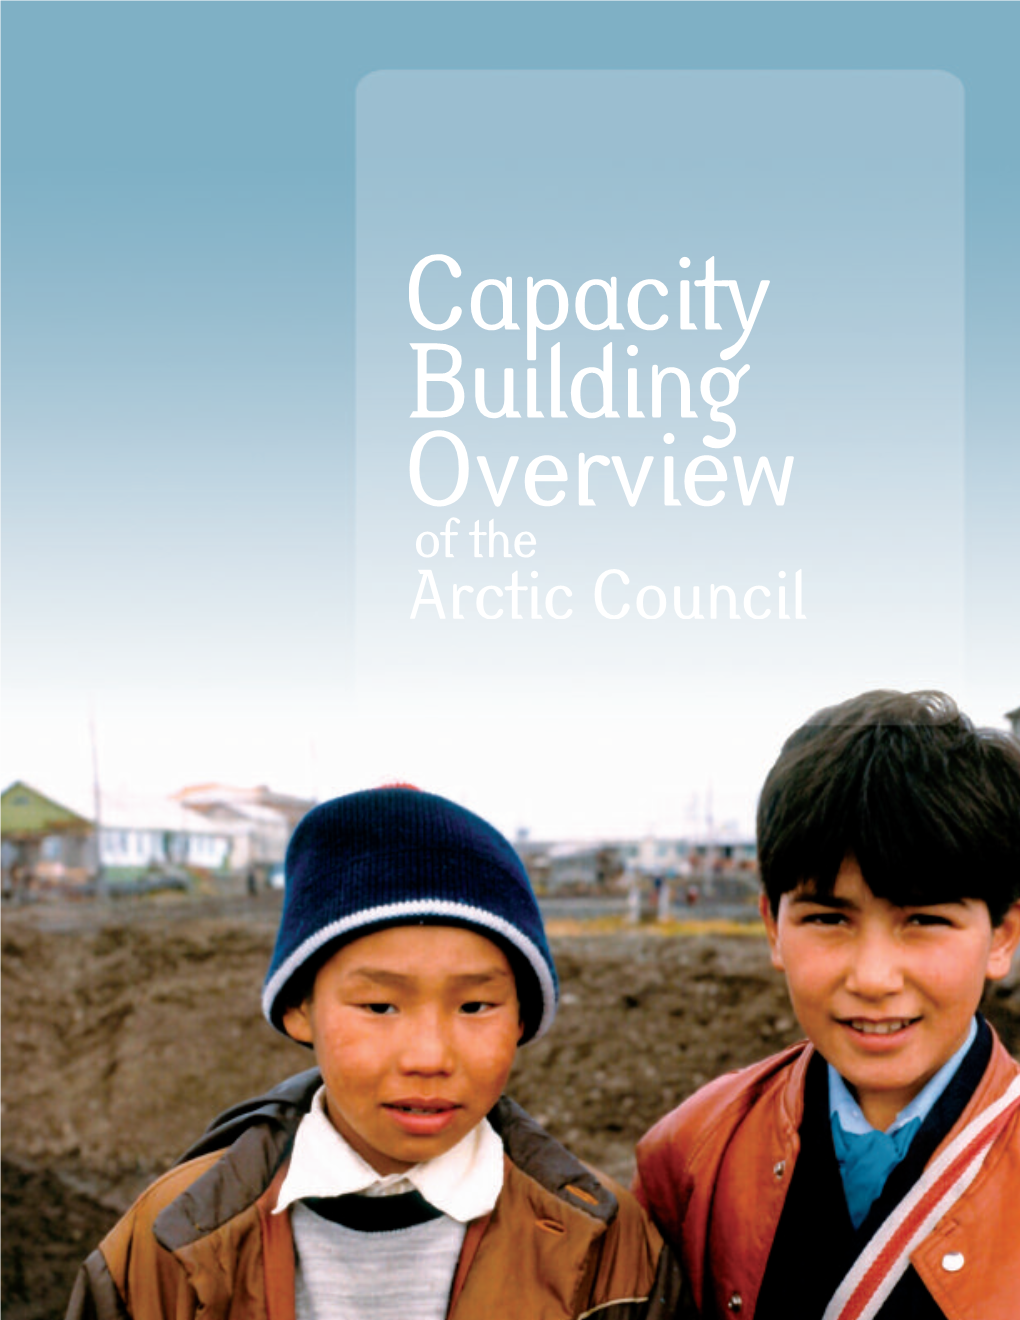 Capacity Building Overview of the Arctic Council.Pdf